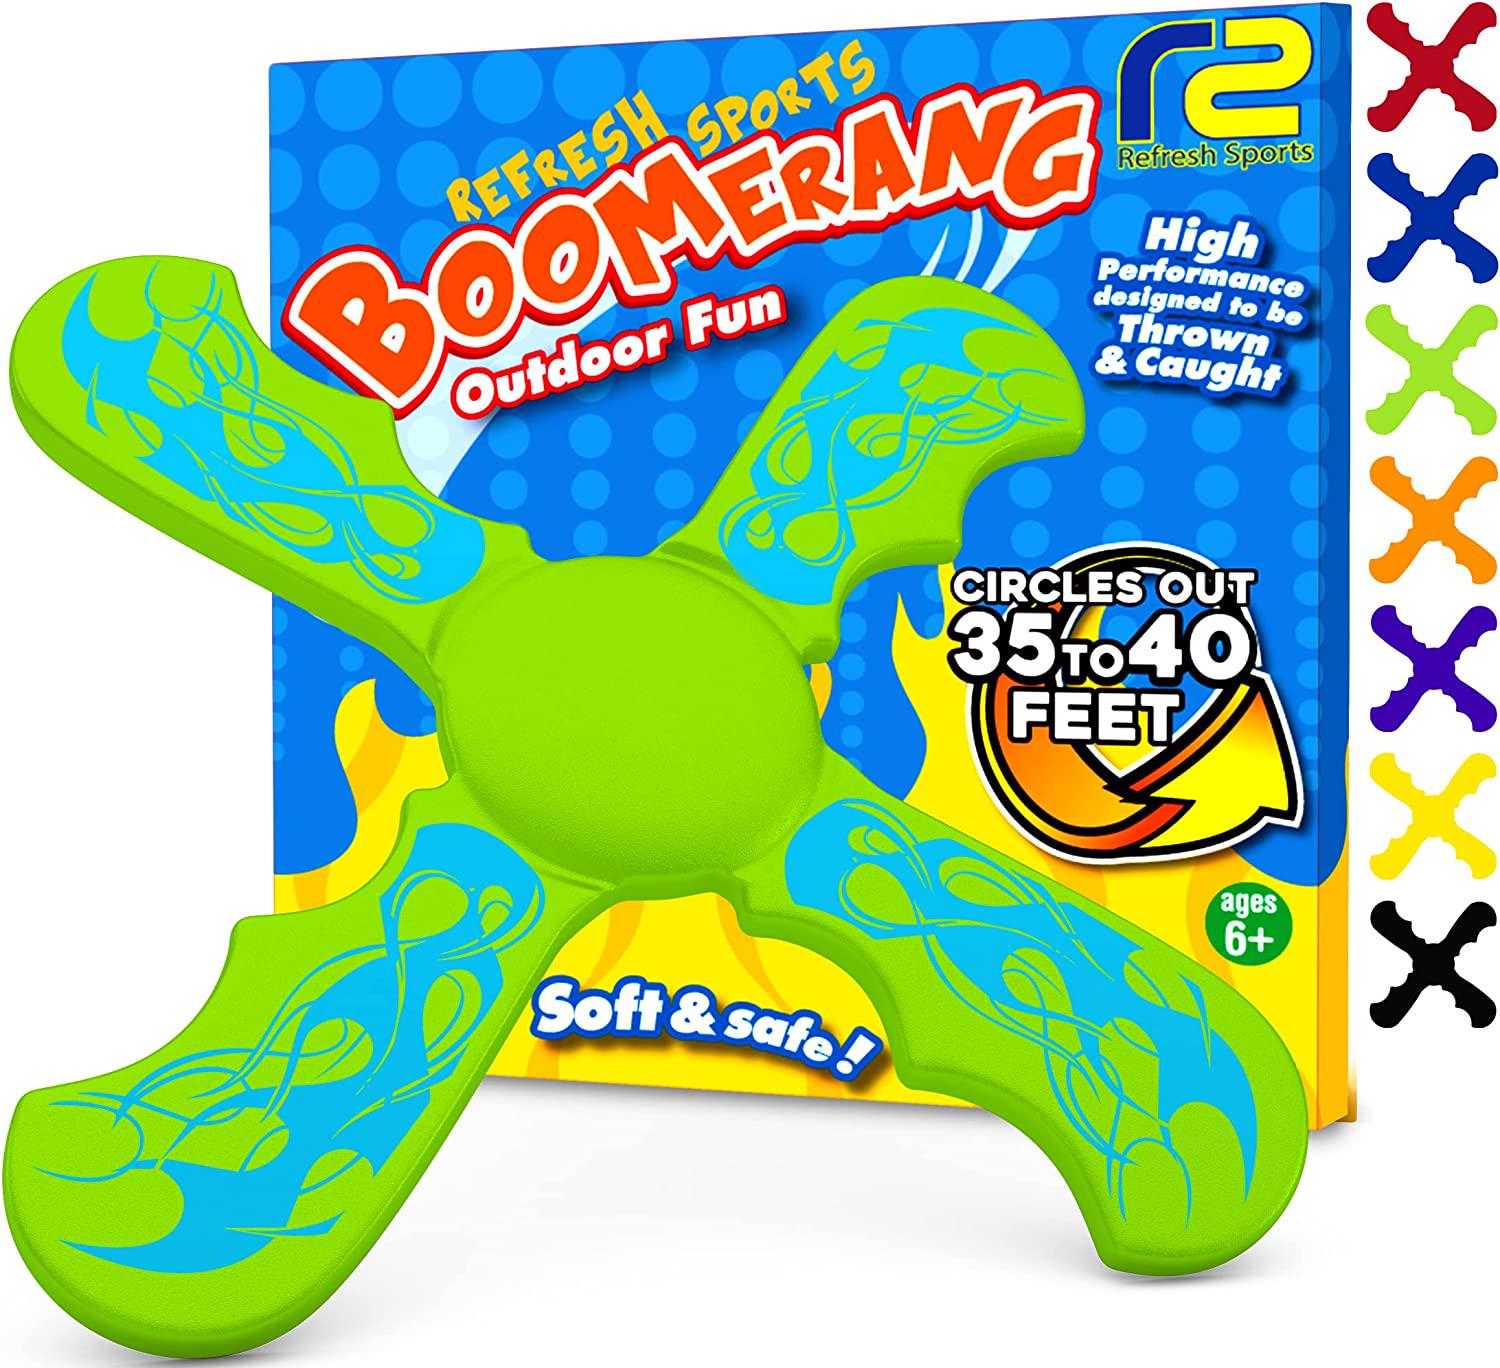 Refresh Sports, Frisbees for Kids: Best Soft Frisbee Kids Boomerang - Outdoor Flying Disc Beach Frisbee for Kids - Fun Kid Mini Frisbee Disc for Boys Girls - Foam Kids Frisby Discs and Green Toy Boomerangs Frizbee Toys